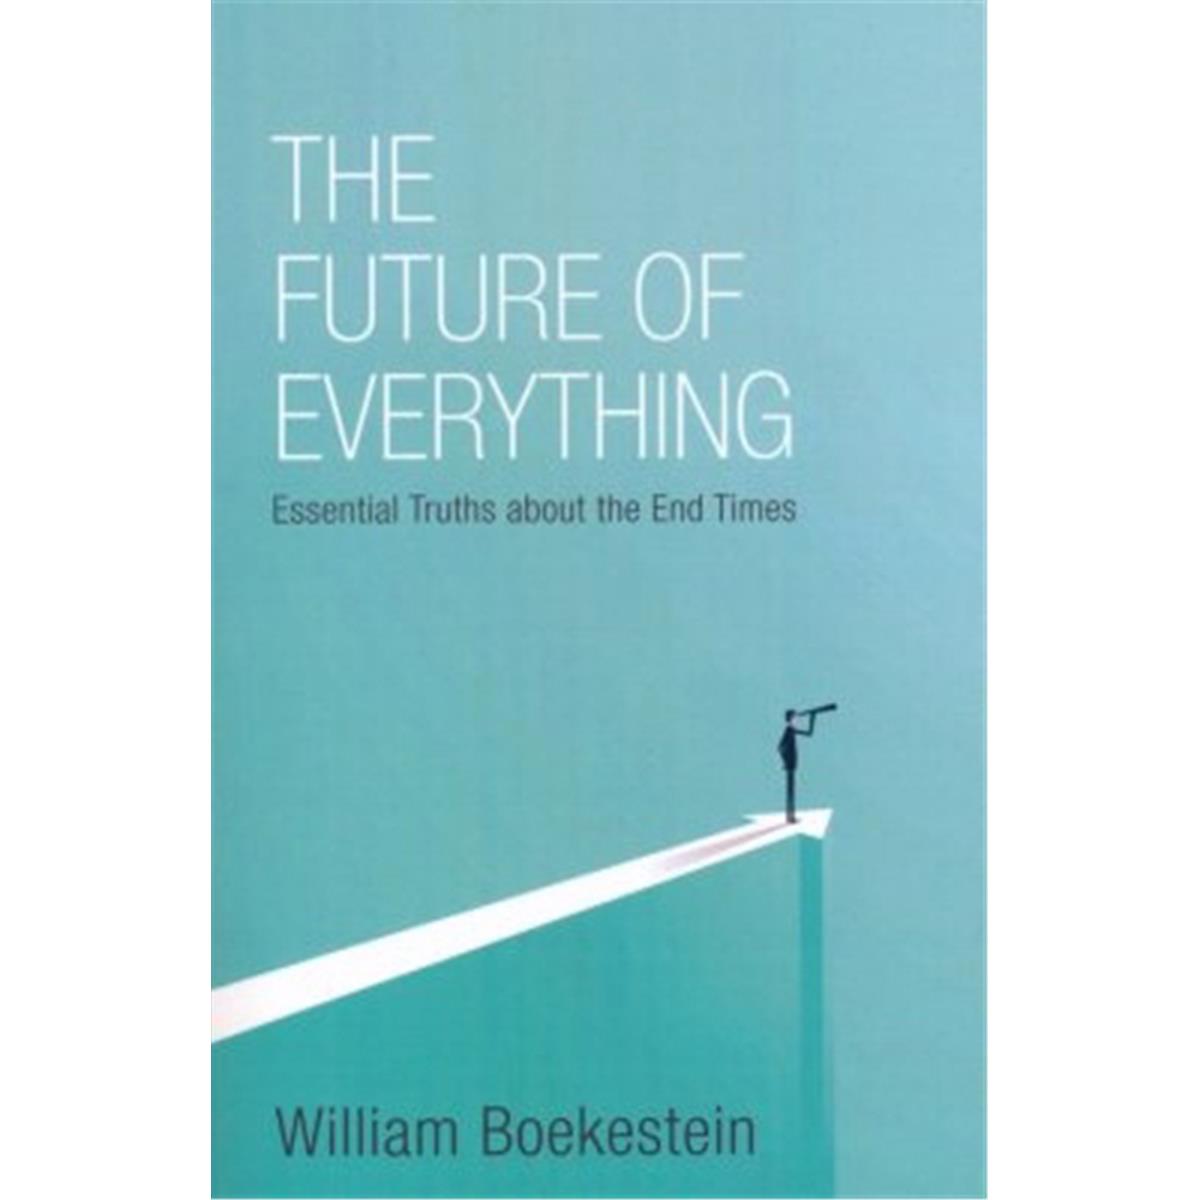 Reformation Heritage Books 147526 The Future Of Everything